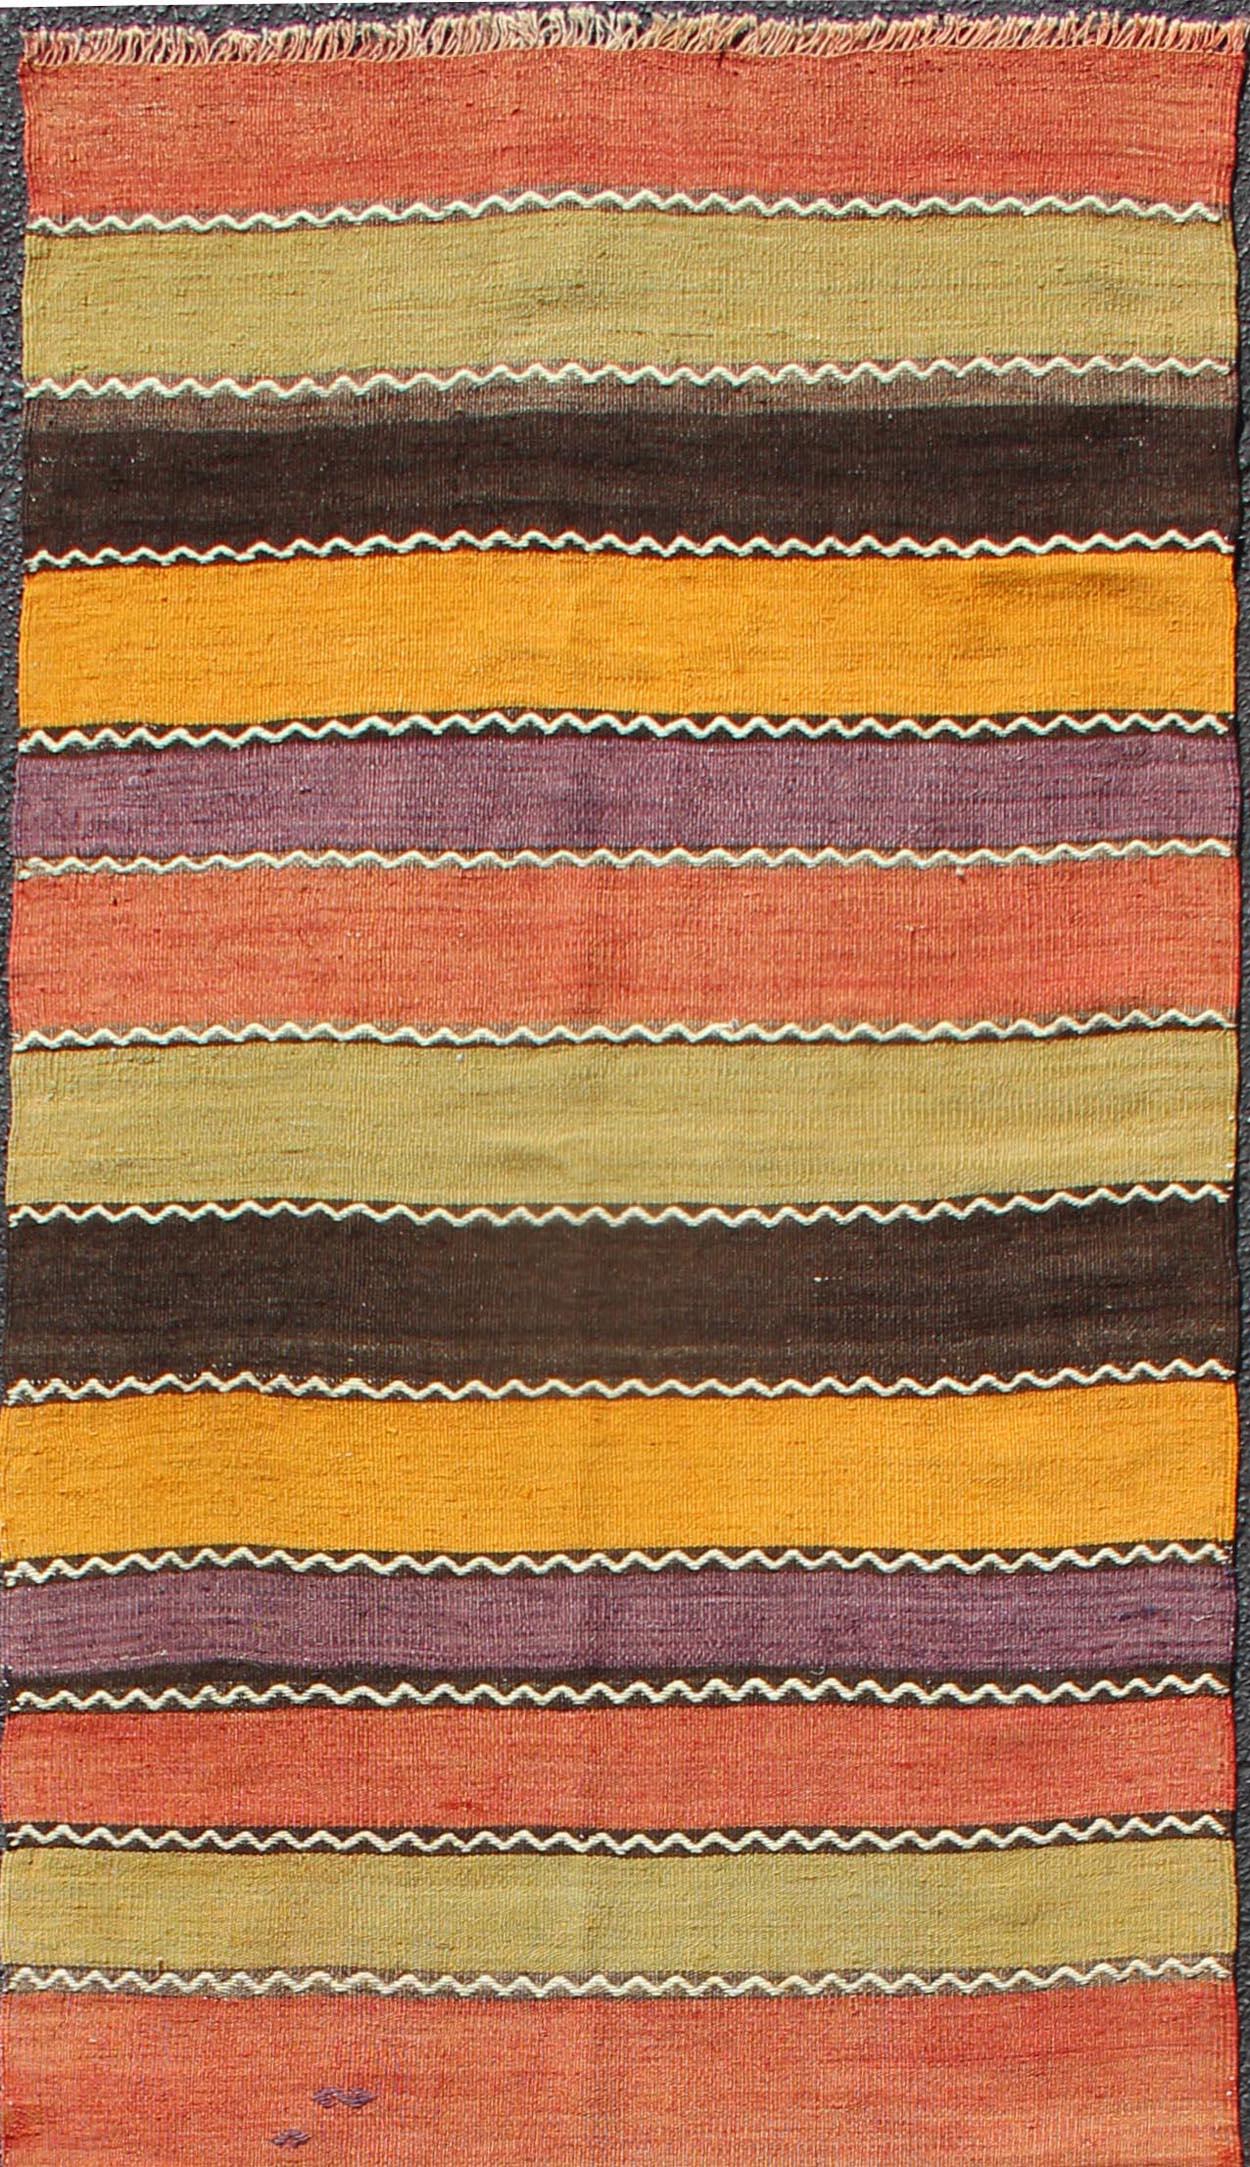 Hand-Woven Vintage Kilim Runner with Horizontal Stripes in Orange, Green, Purple, Red, Gold